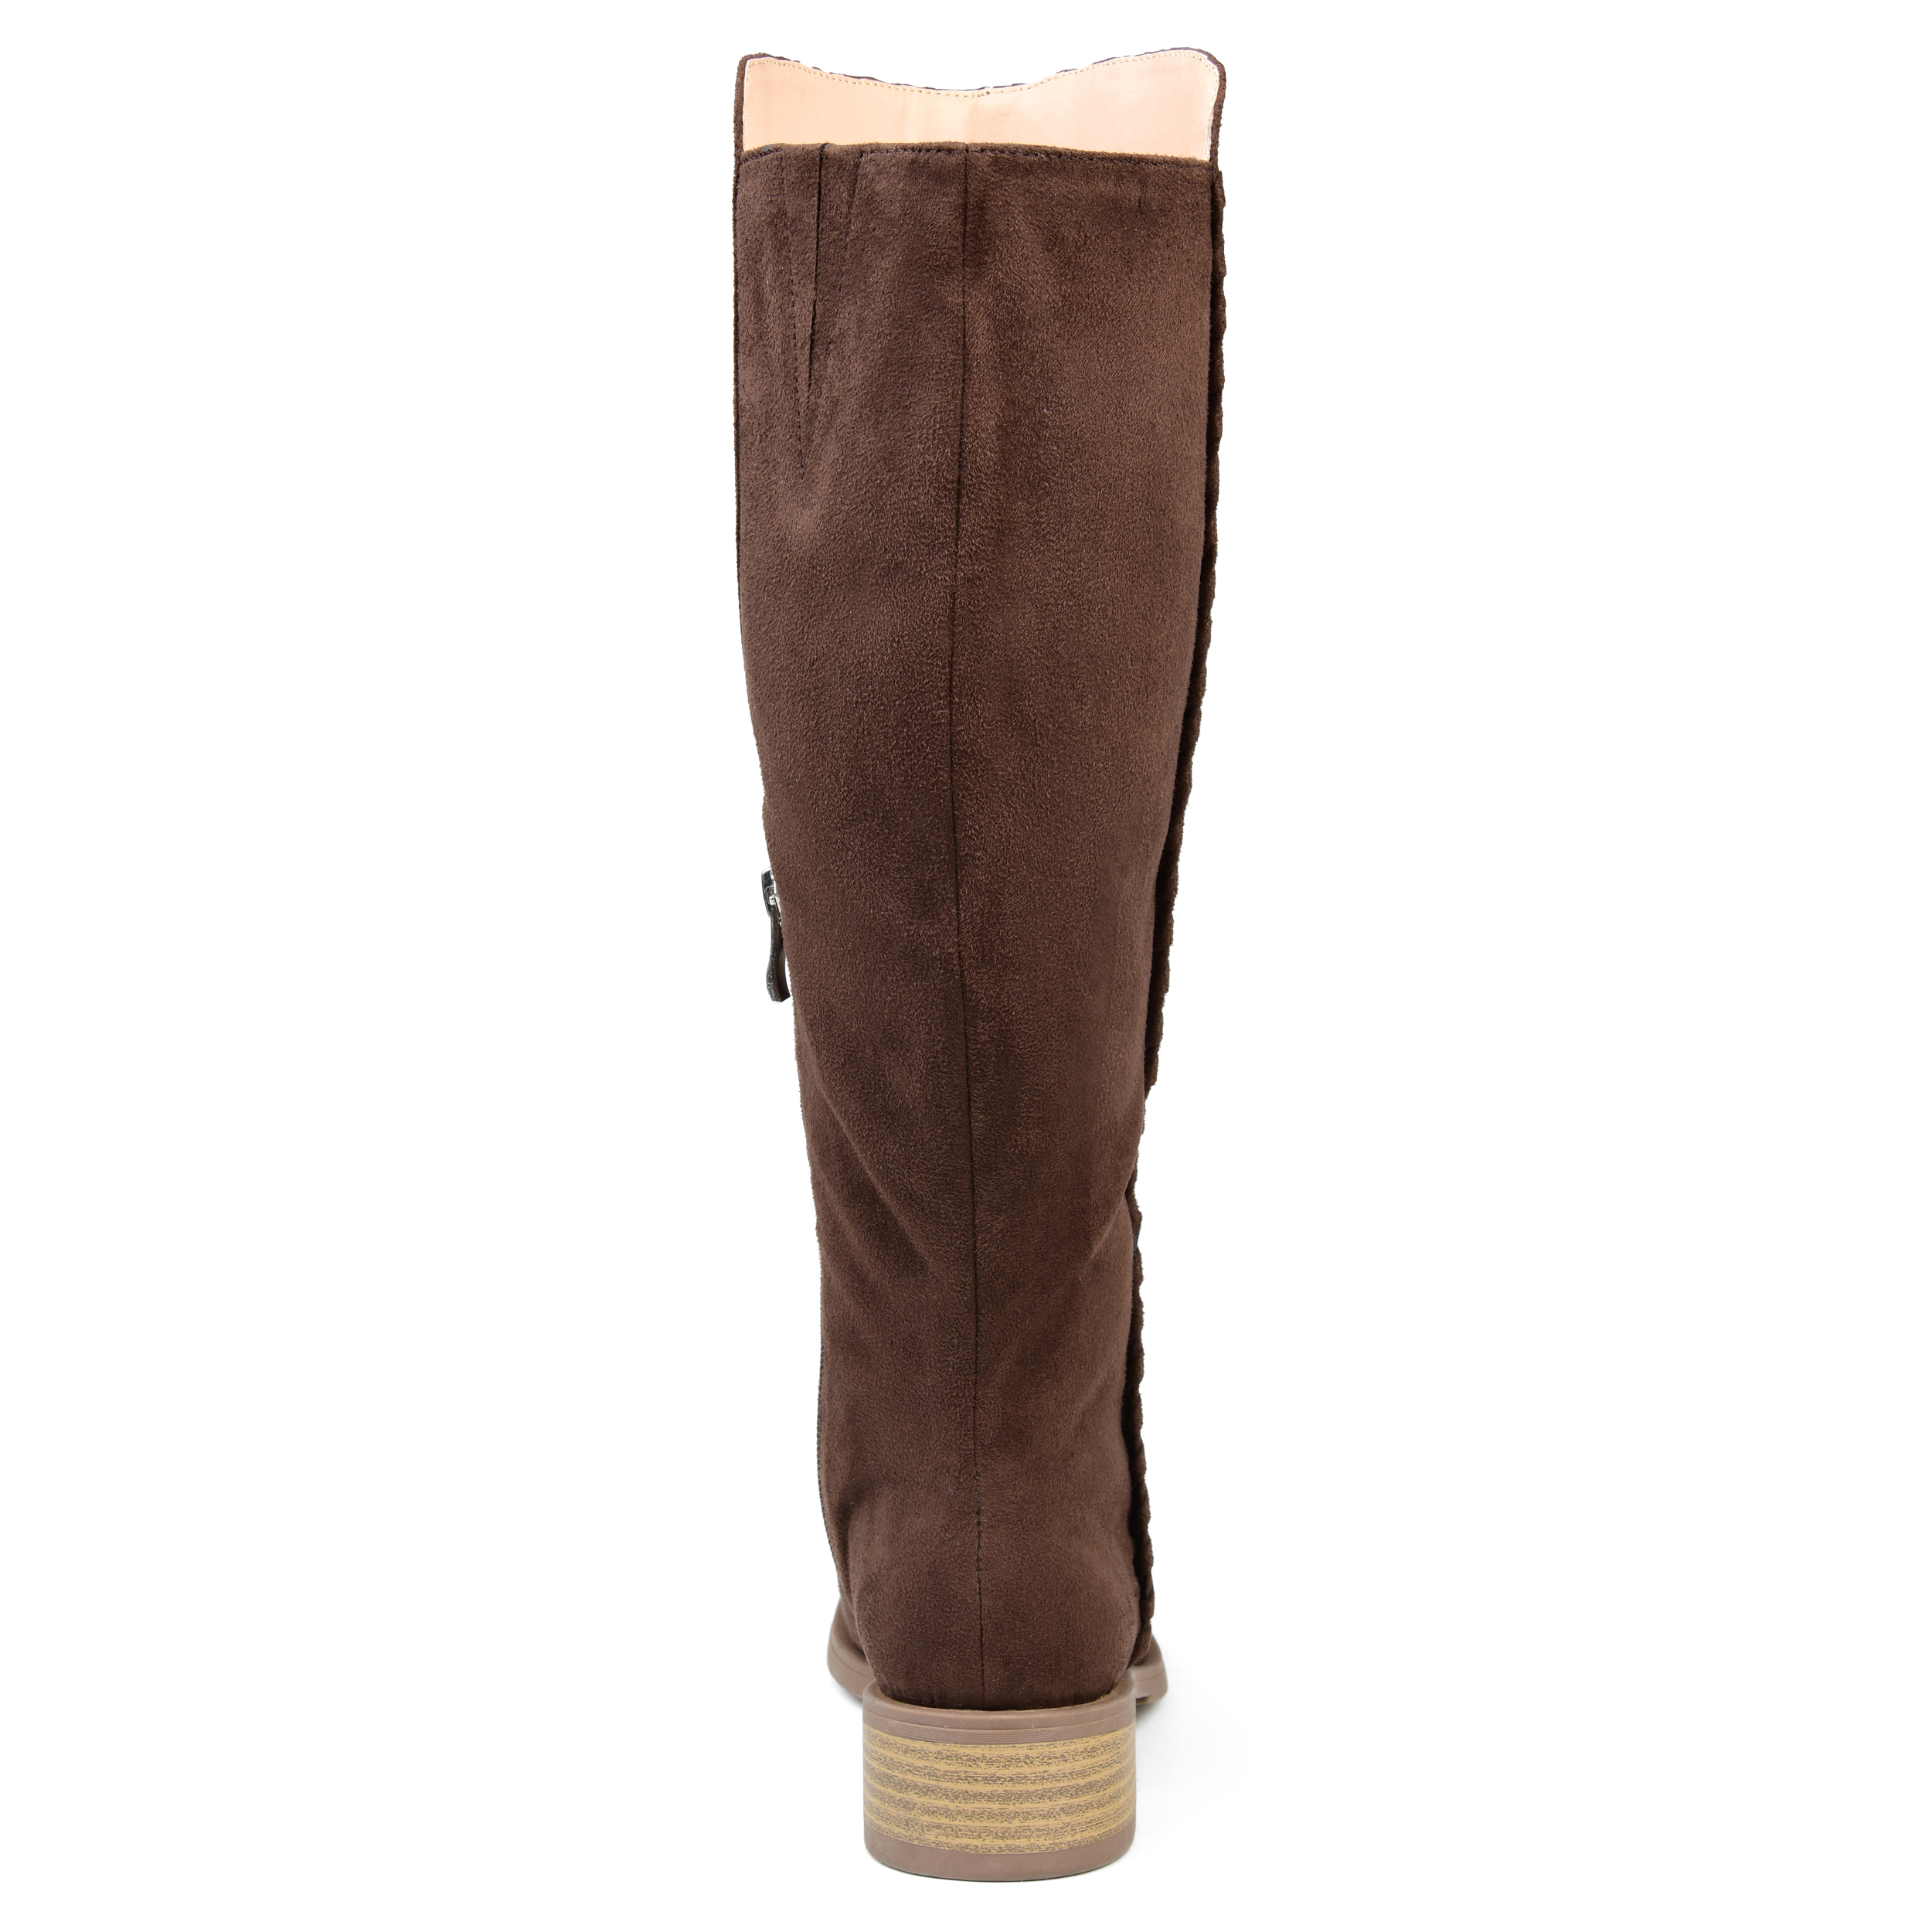 Womens Comfort Whipstitch Riding Boot - image 4 of 9